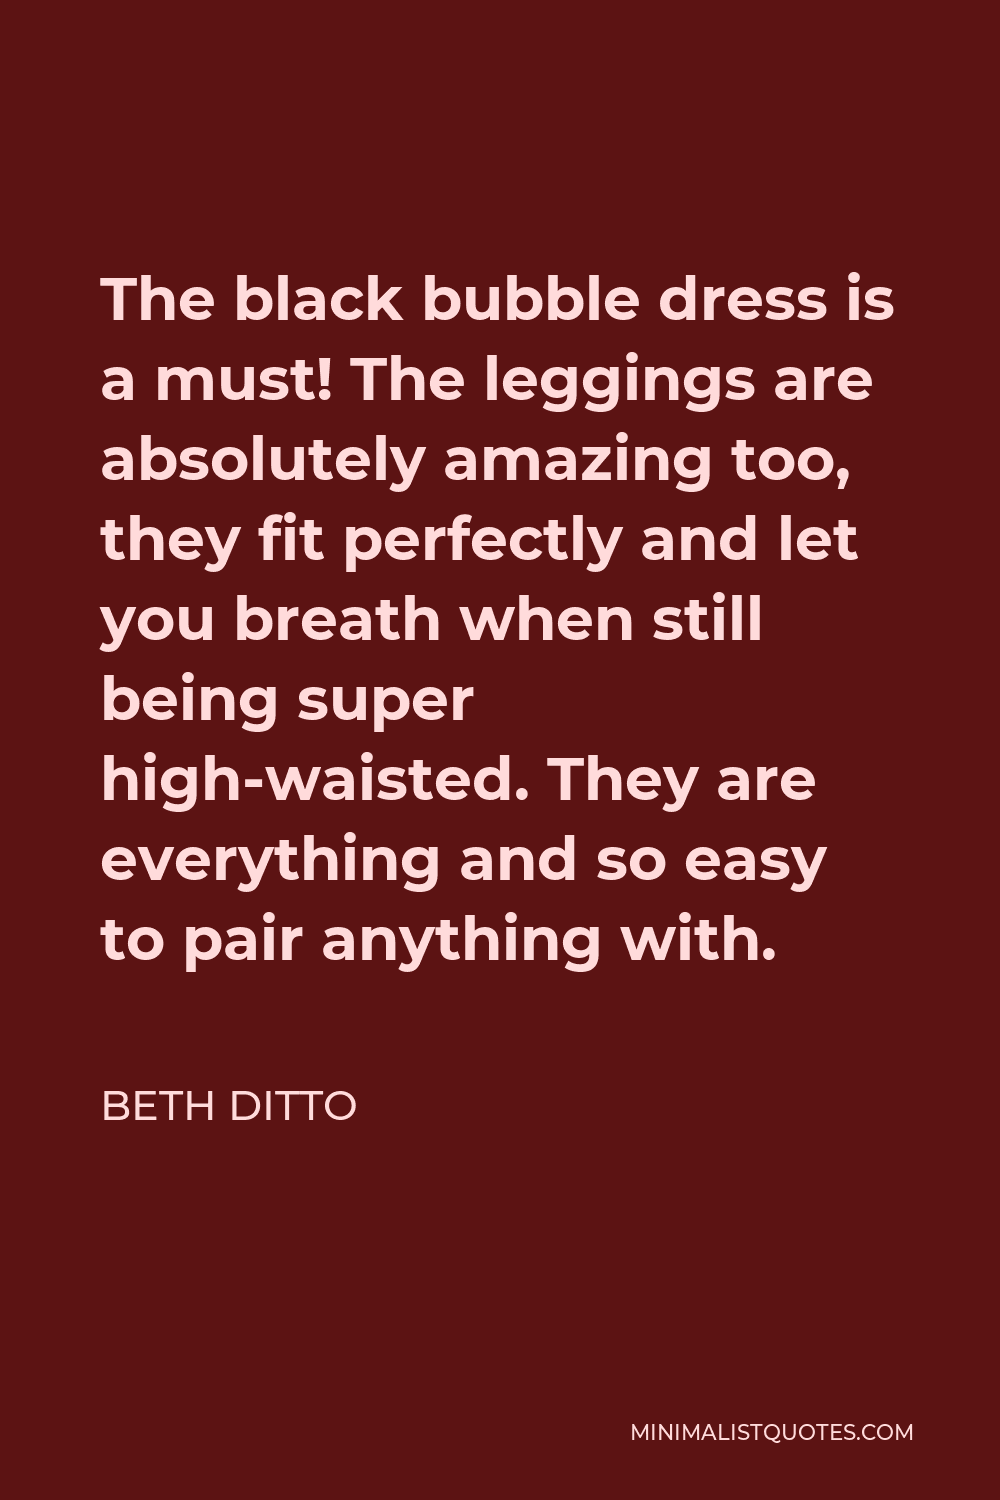 Beth Ditto Quote - The black bubble dress is a must! The leggings are absolutely amazing too, they fit perfectly and let you breath when still being super high-waisted. They are everything and so easy to pair anything with.